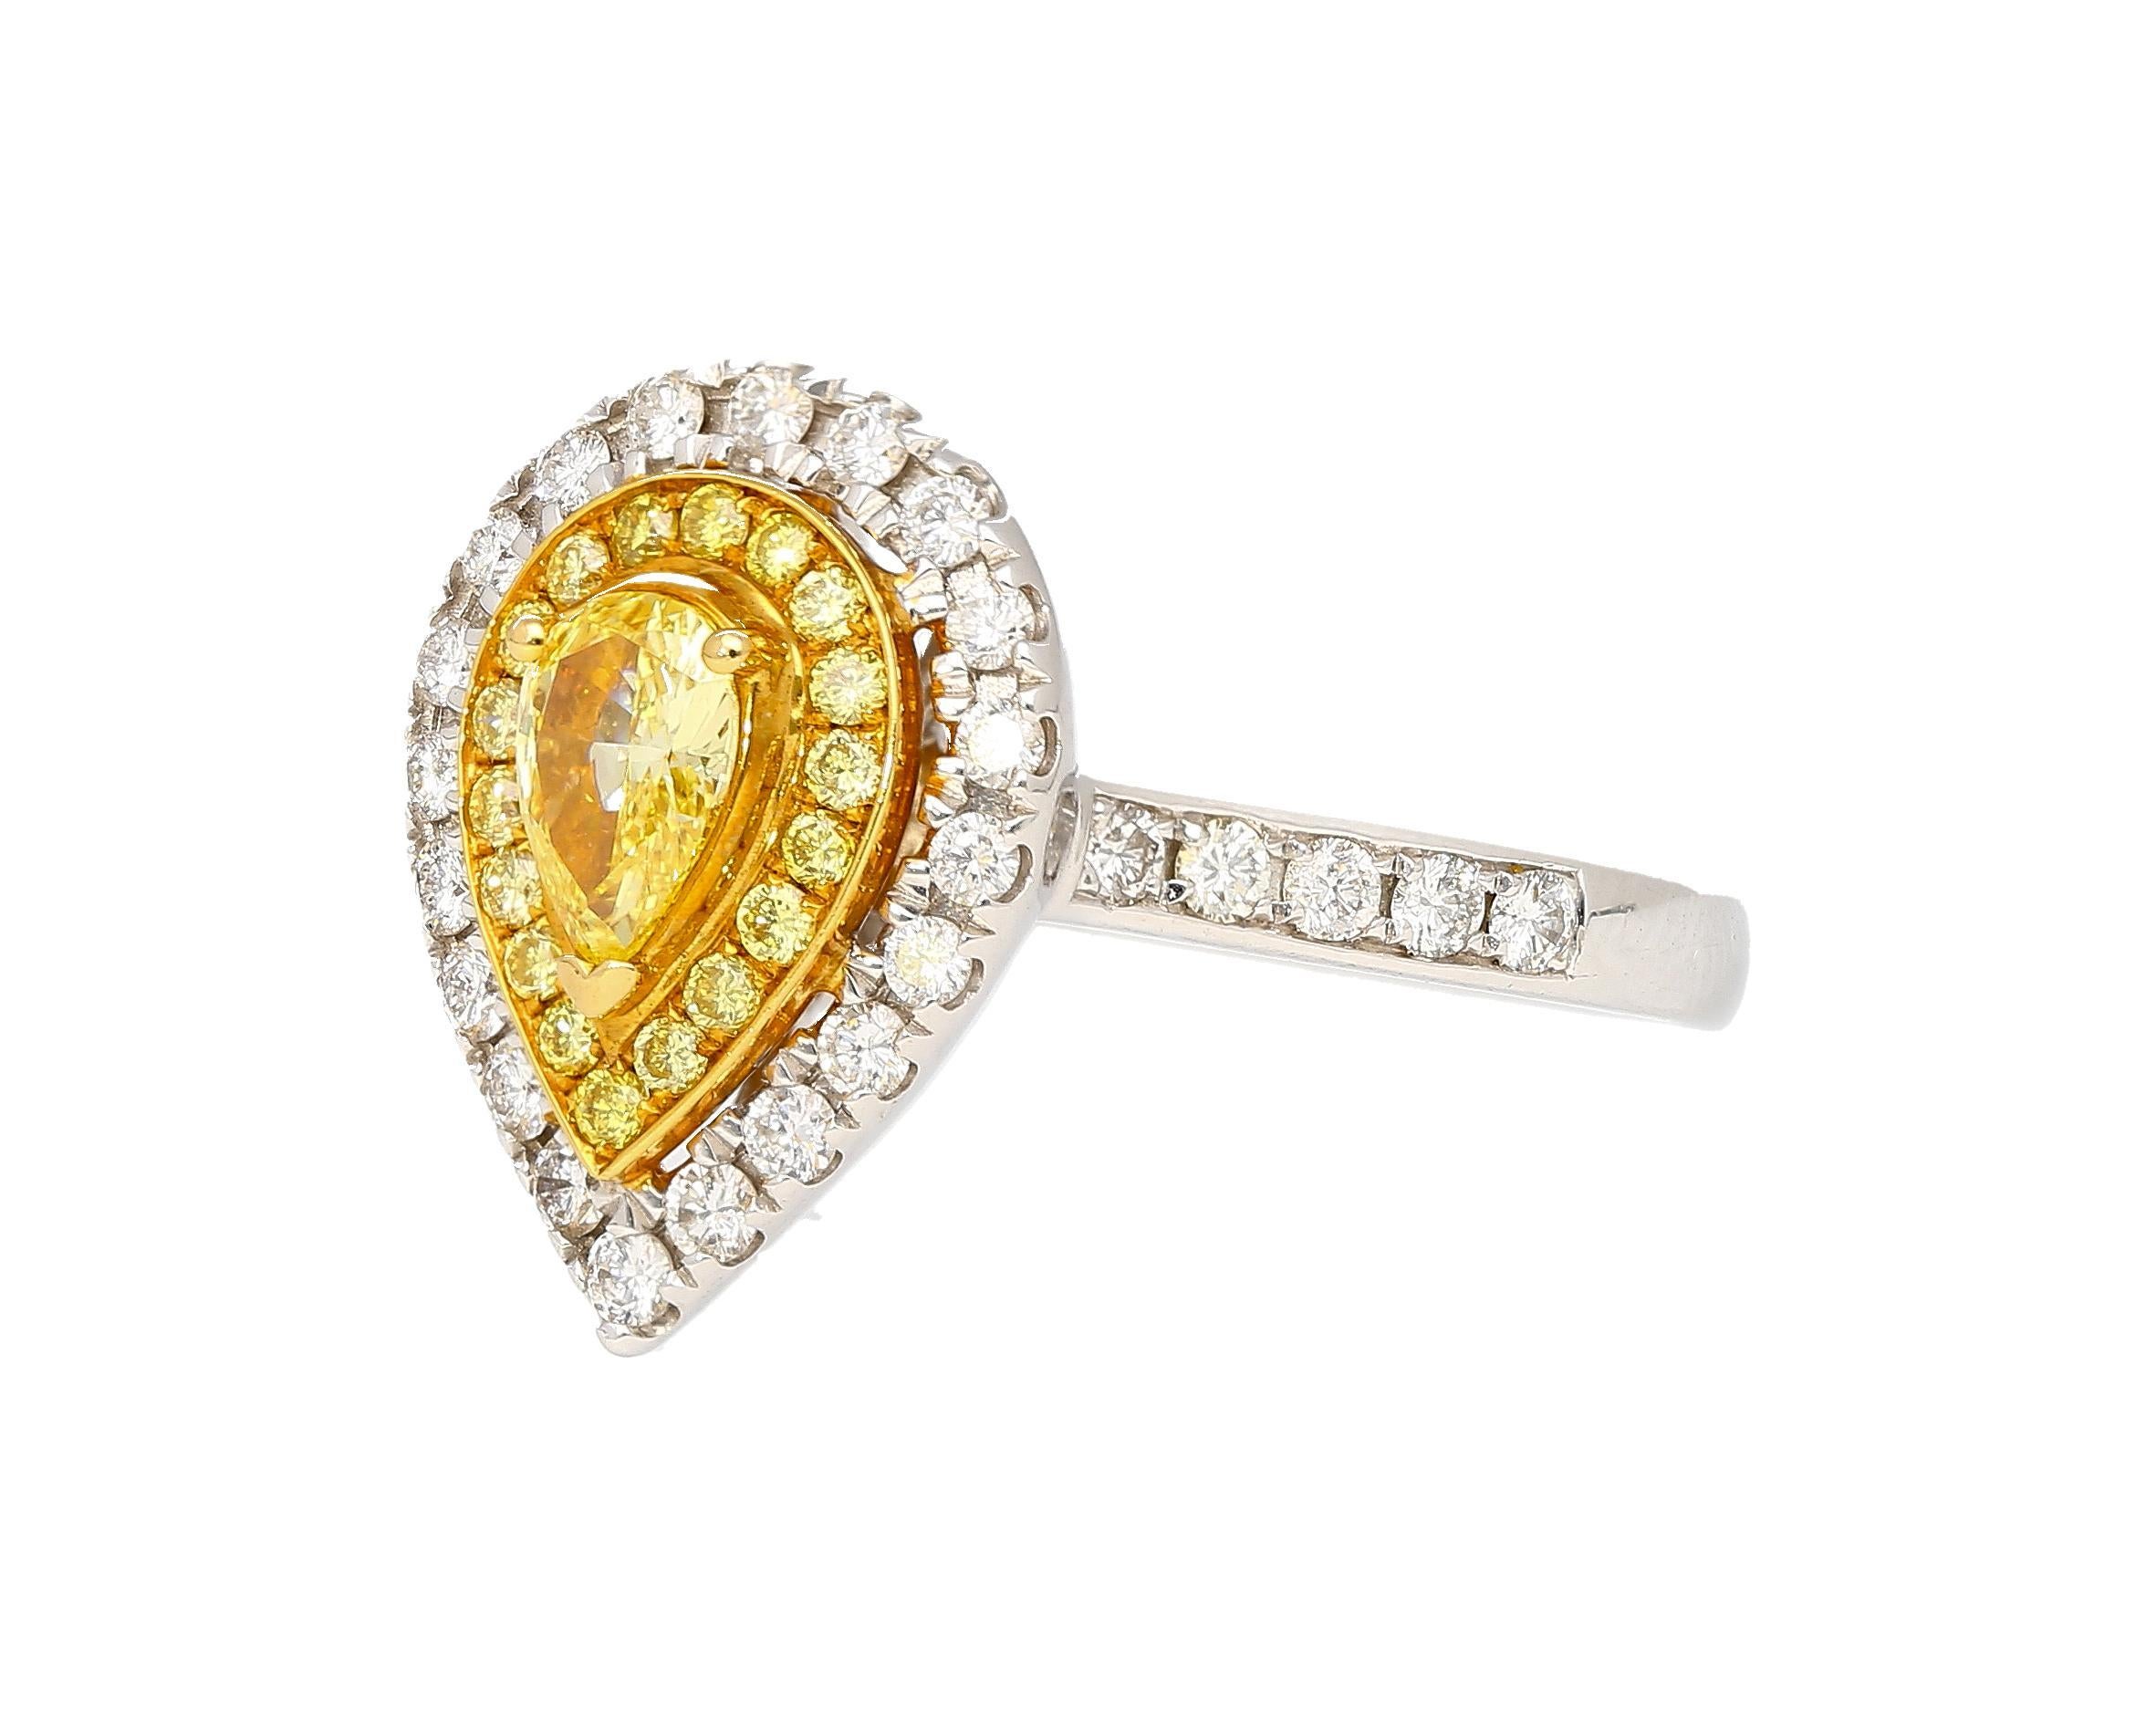 EGL Certified 1.05 Carat Fancy Vivid Yellow Diamond Pear Shape Ring In New Condition For Sale In Miami, FL